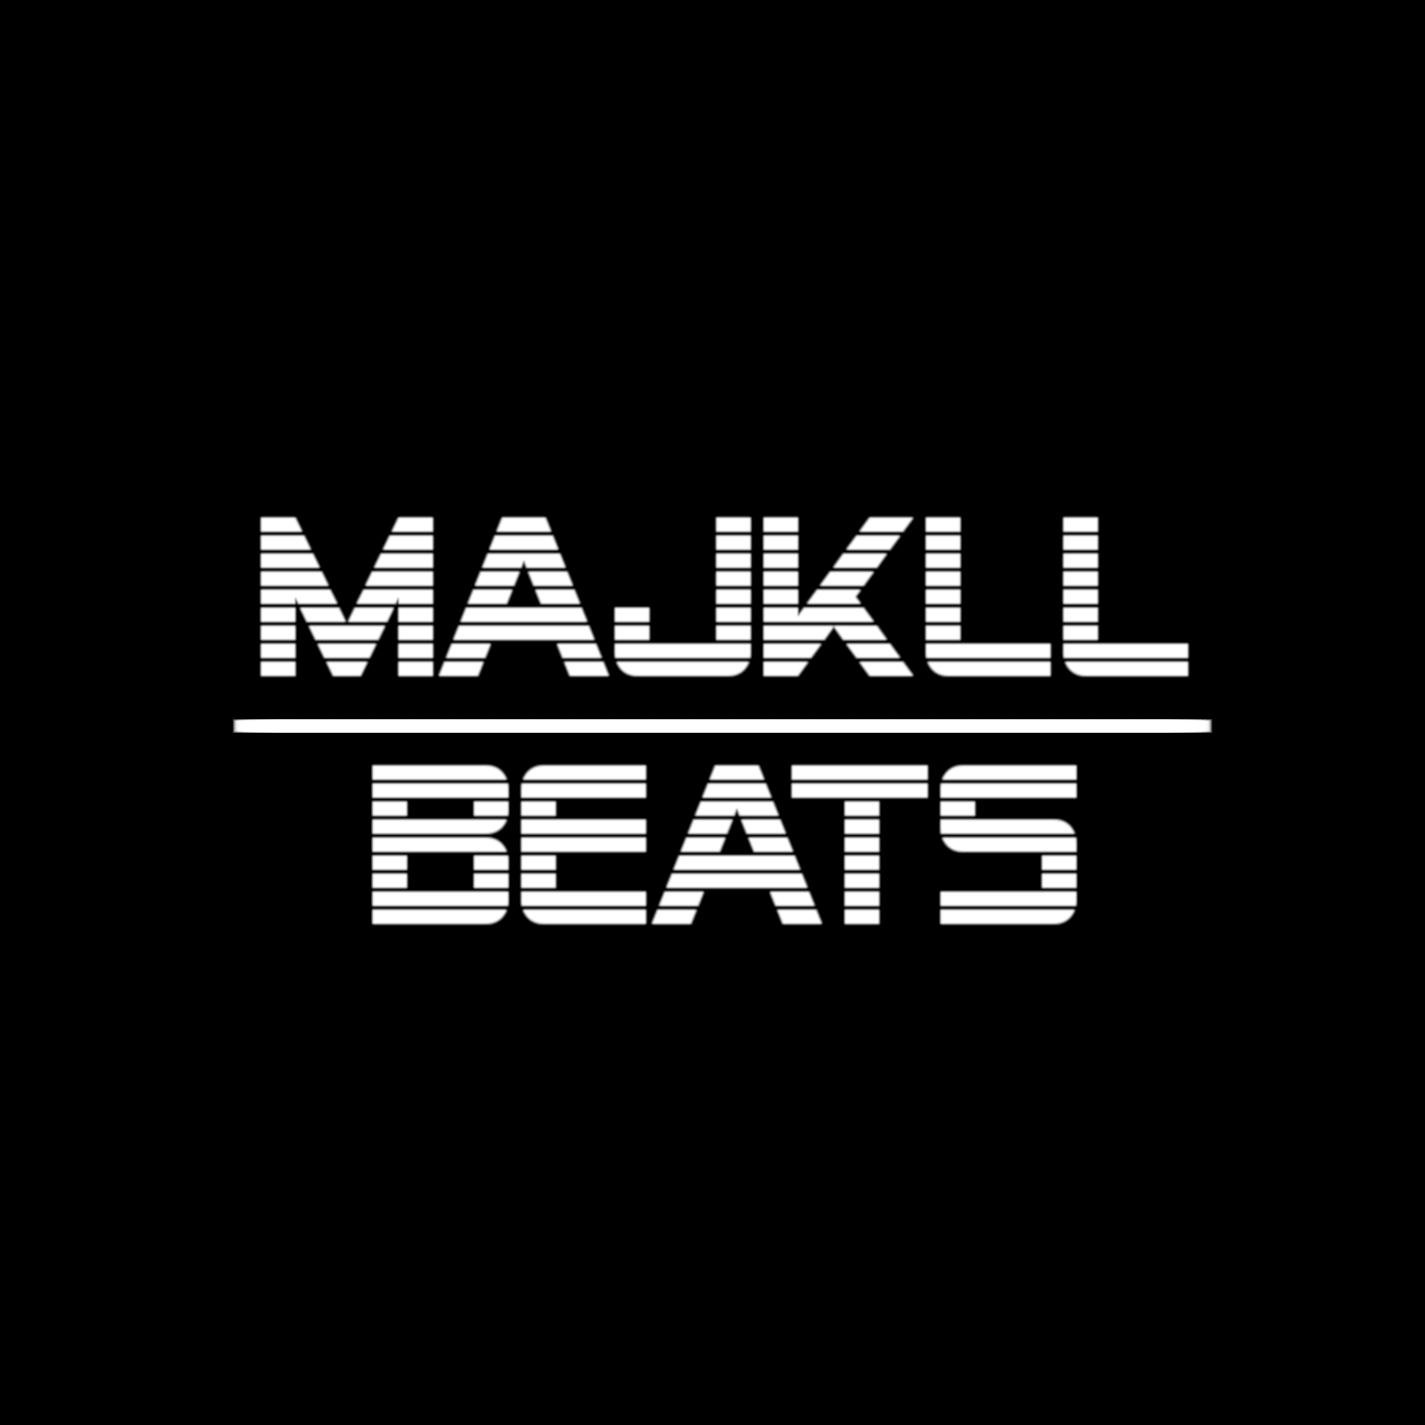 Beats For Sale!
DM For Details
Purchases are made using cashapp.
email:majkllbeats@gmail.com